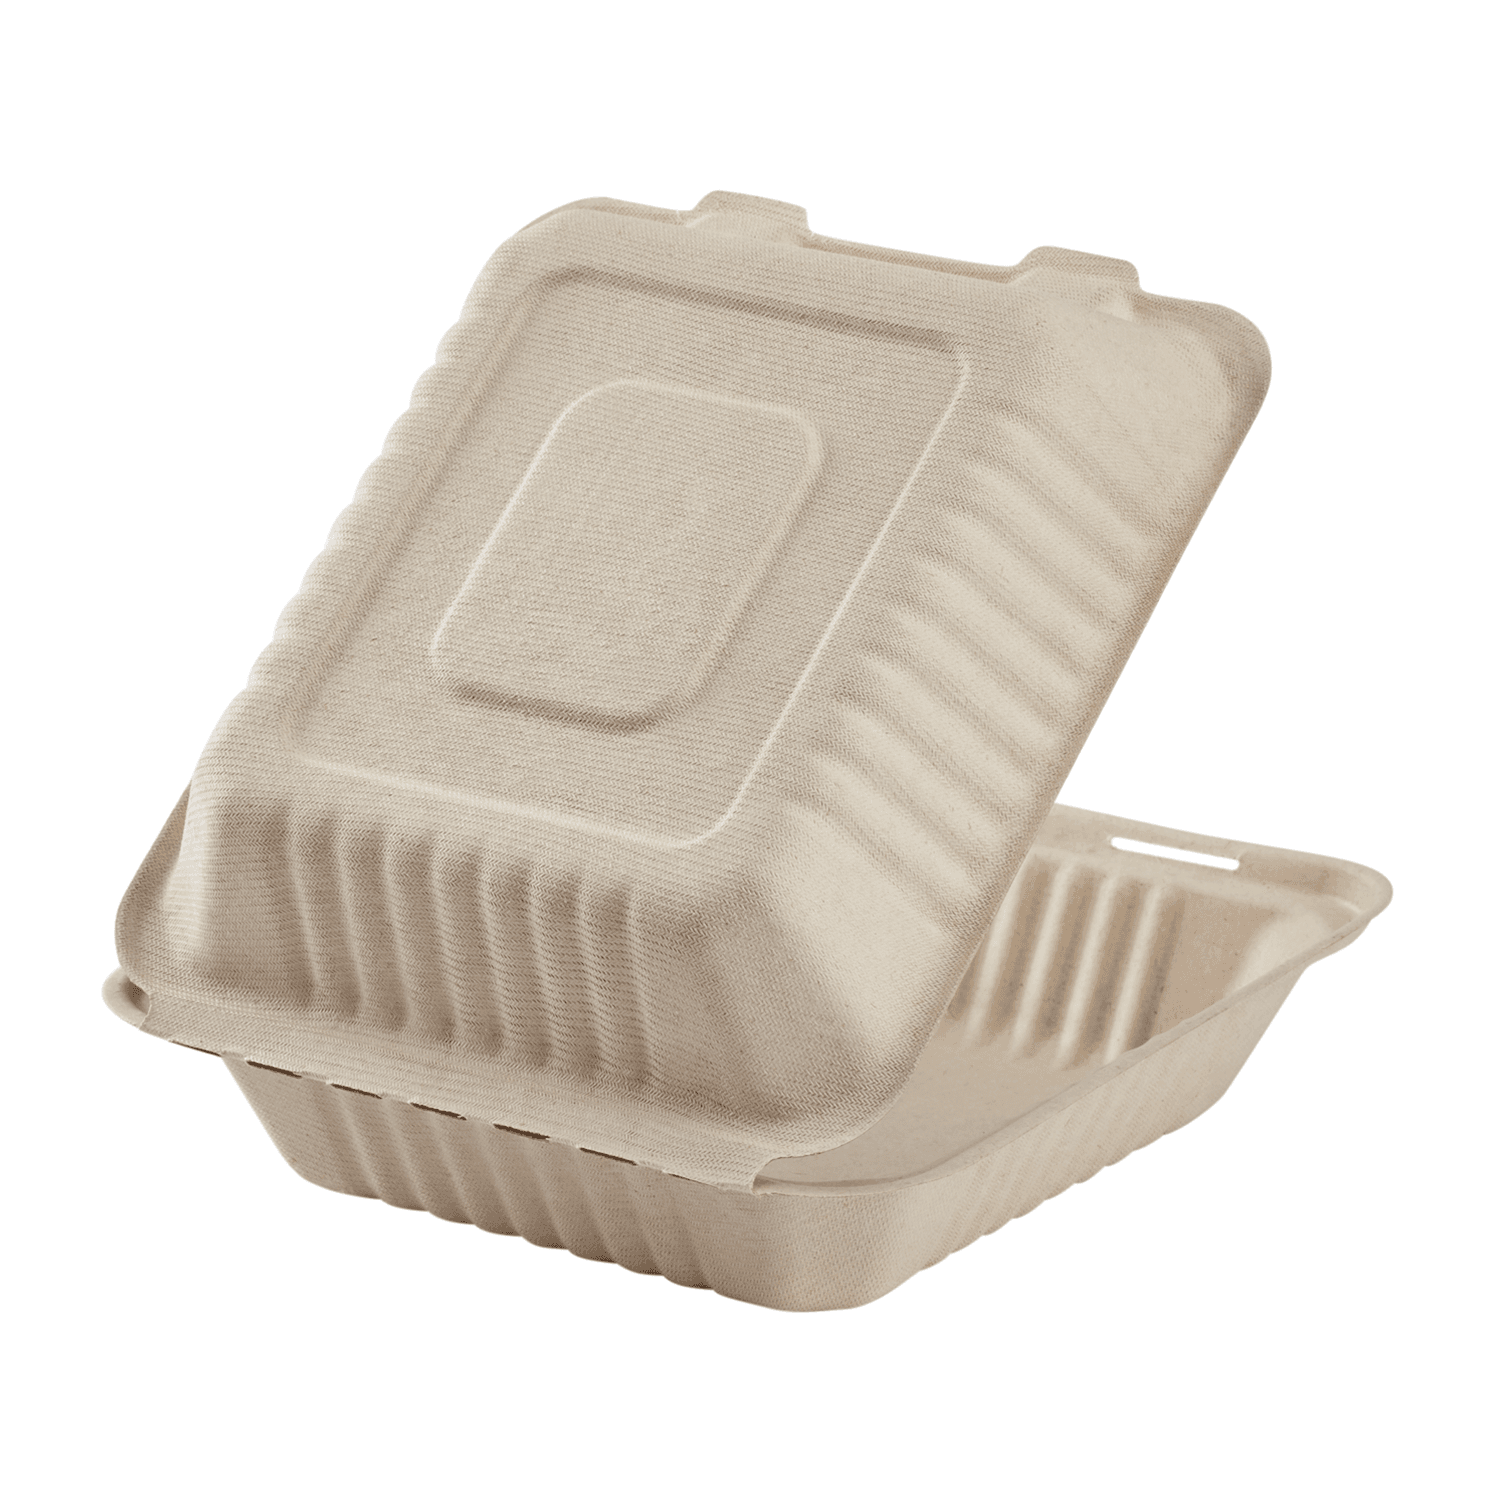 Karat Earth 8''x8'' PFAS Free Compostable Bagasse Hinged Containers, Natural - 200 pcs